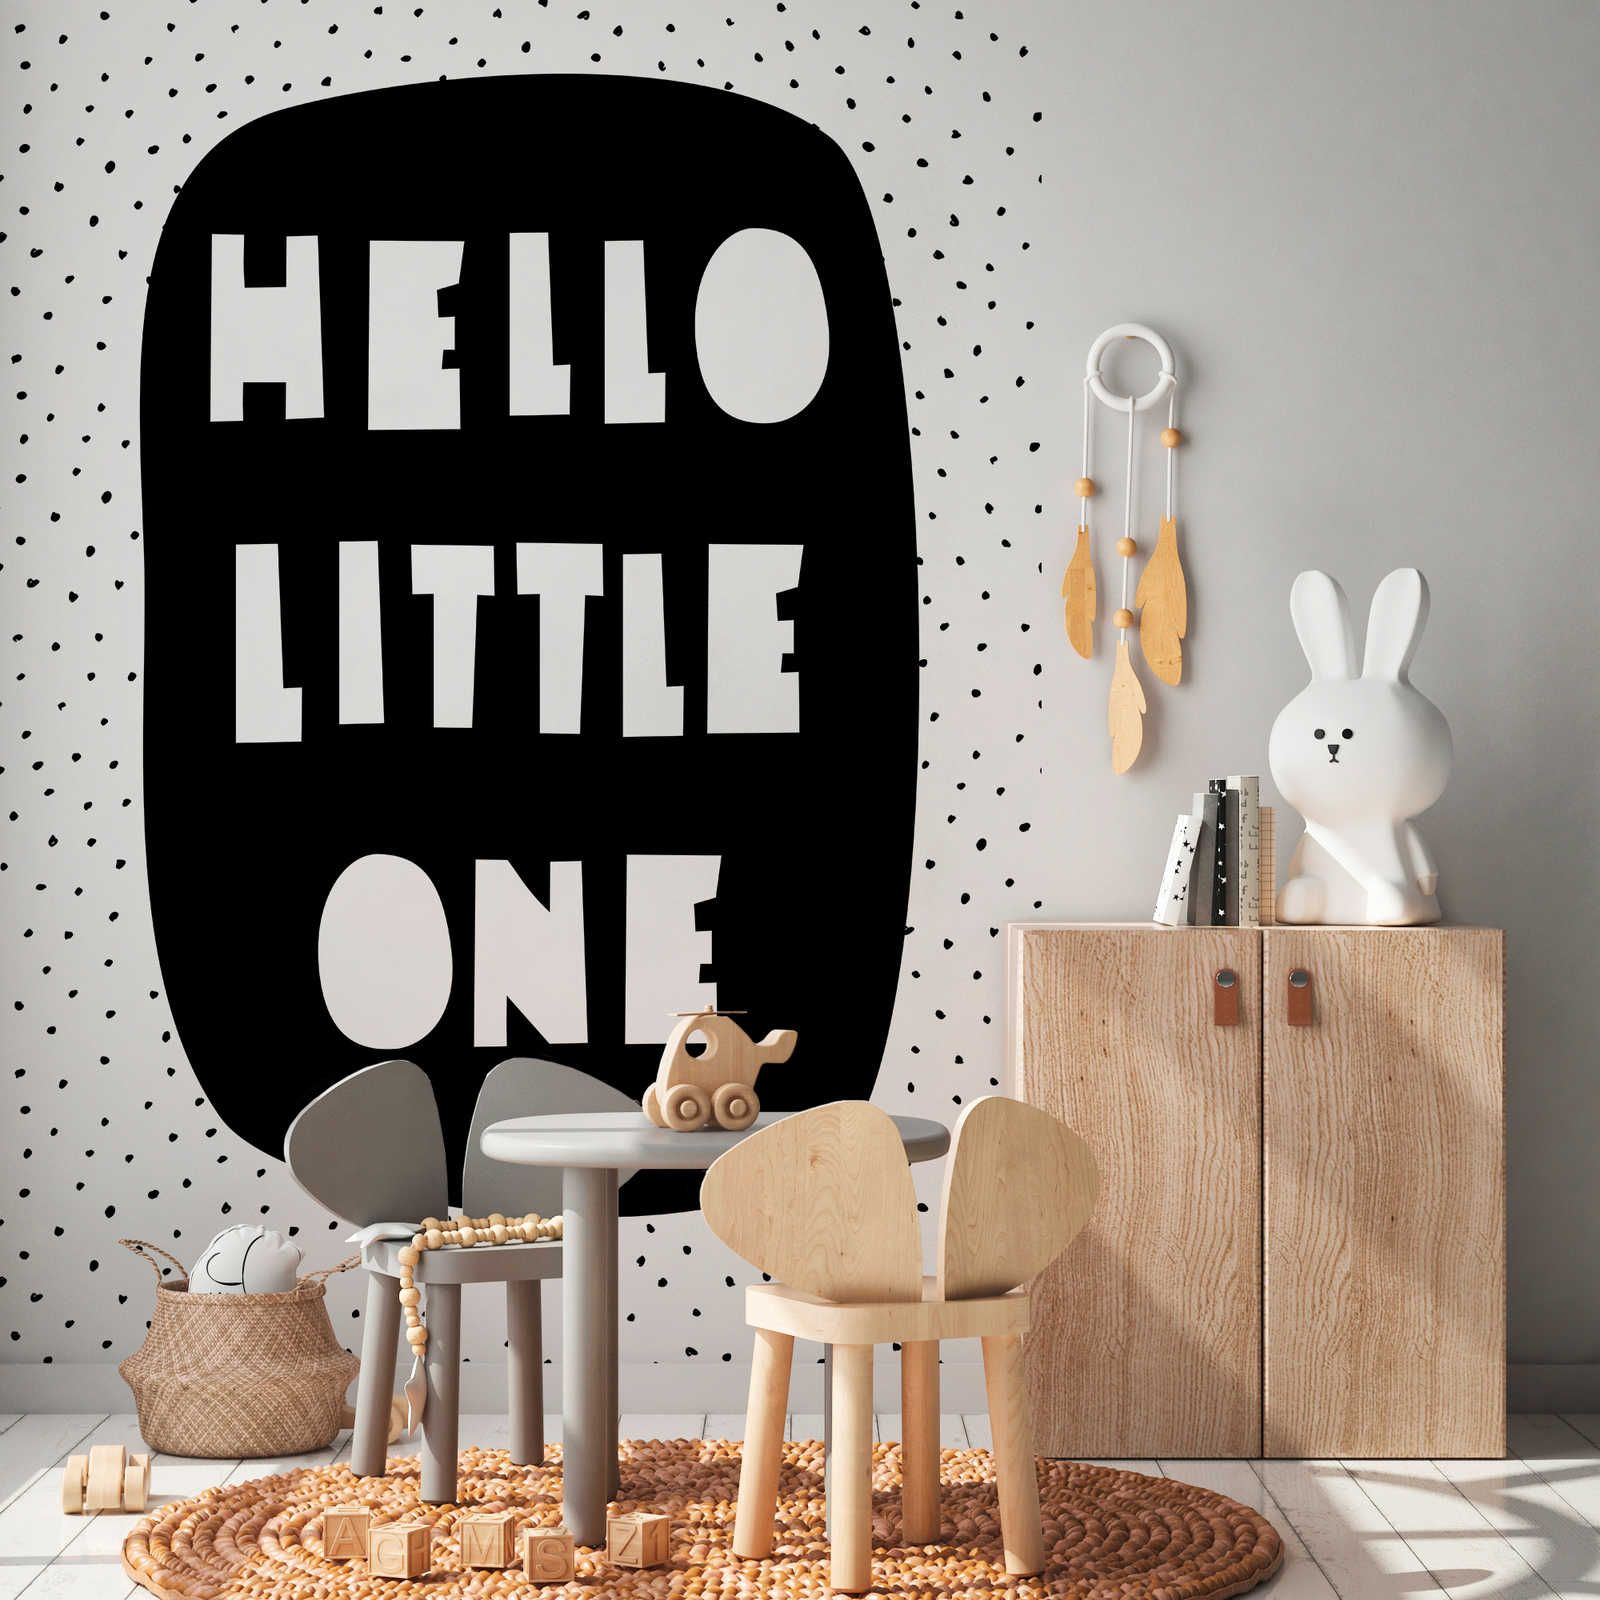 Photo wallpaper for the children's room with "Hello Little One" lettering - Smooth & pearlescent fleece
